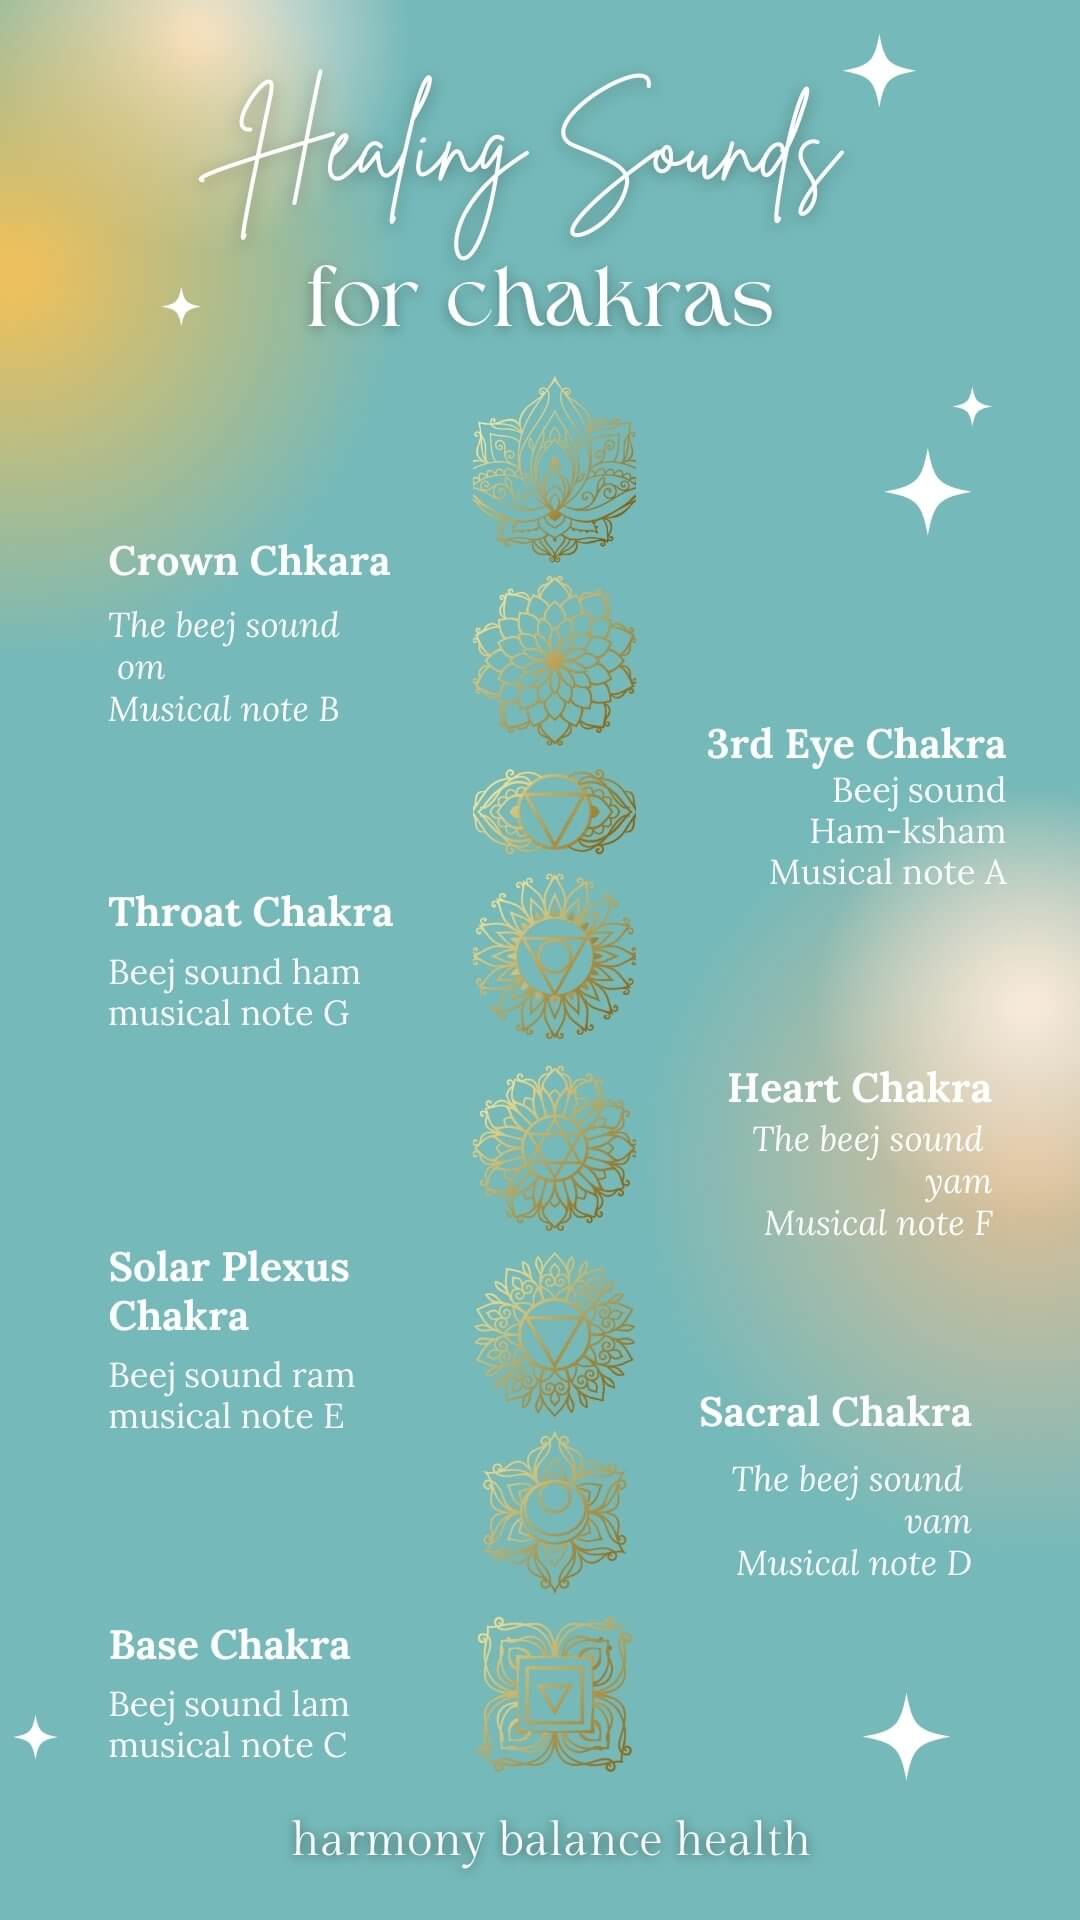 Healing Sounds for Chakras